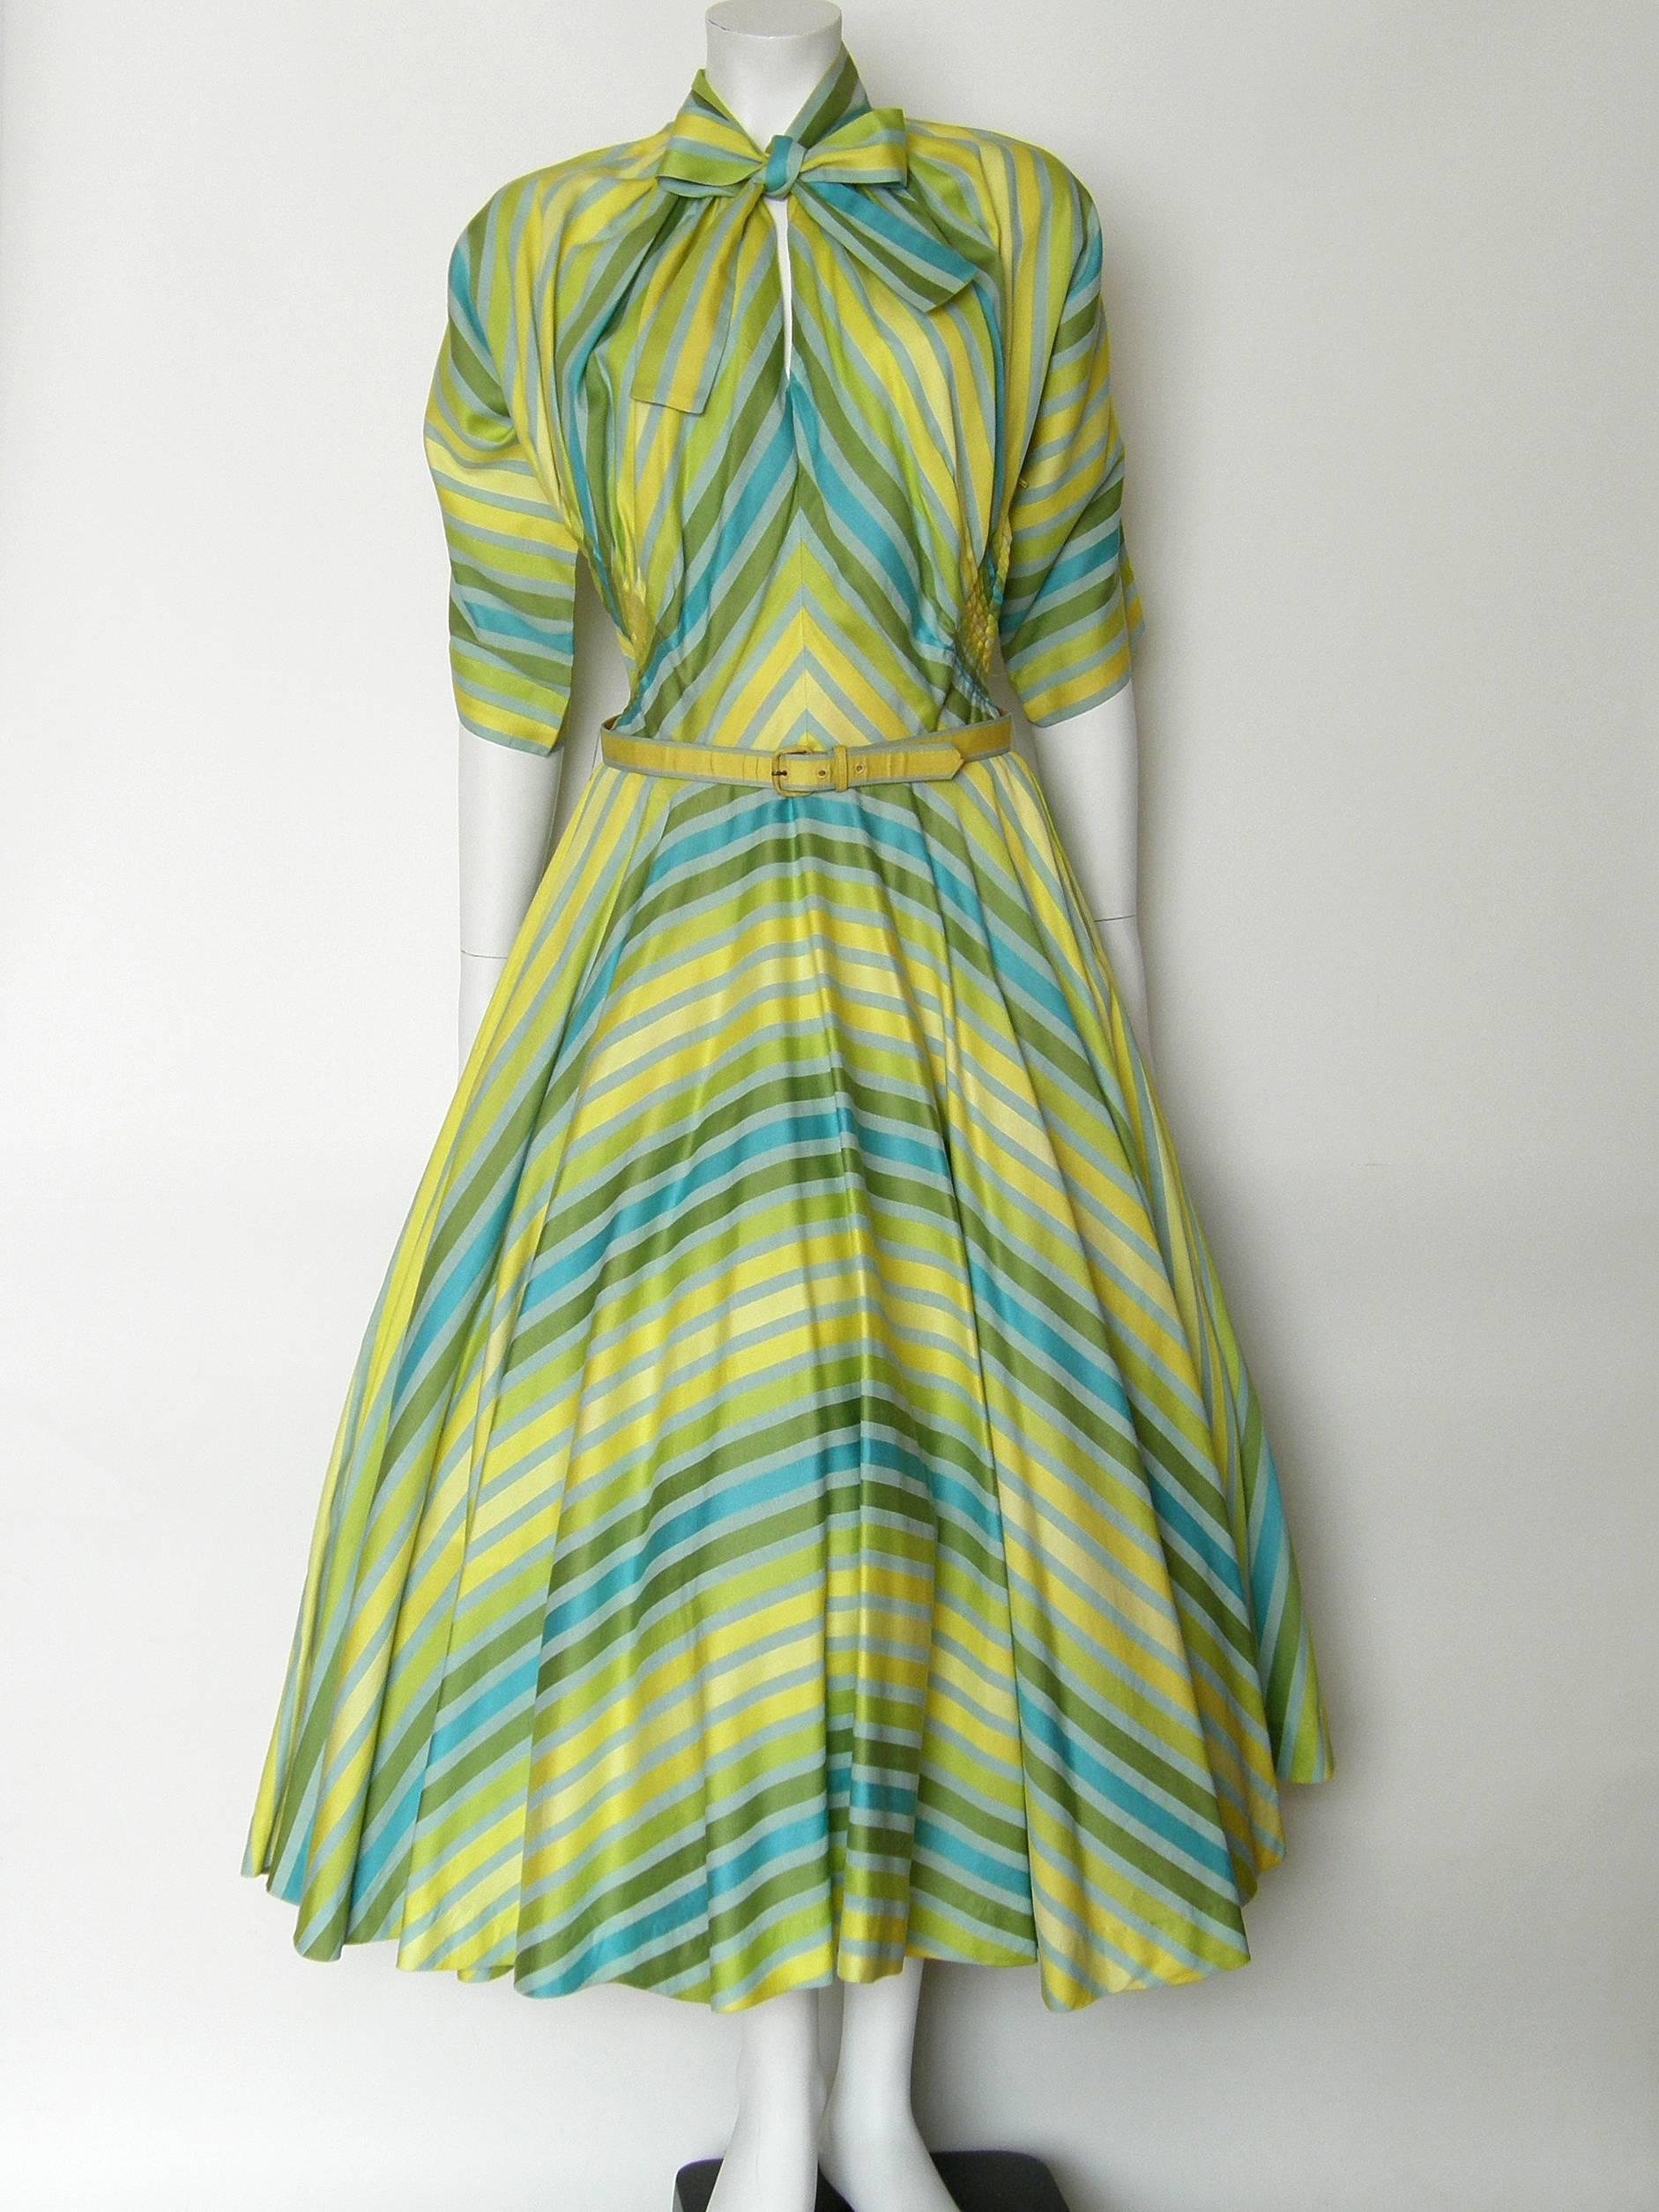 This striped cotton garden party dress was designed for Townley by Claire McCardell, who was hugely influential in bringing comfort to chic and modern clothing for women. She used the stripes to wonderful effect with the mitered, chevron pattern of